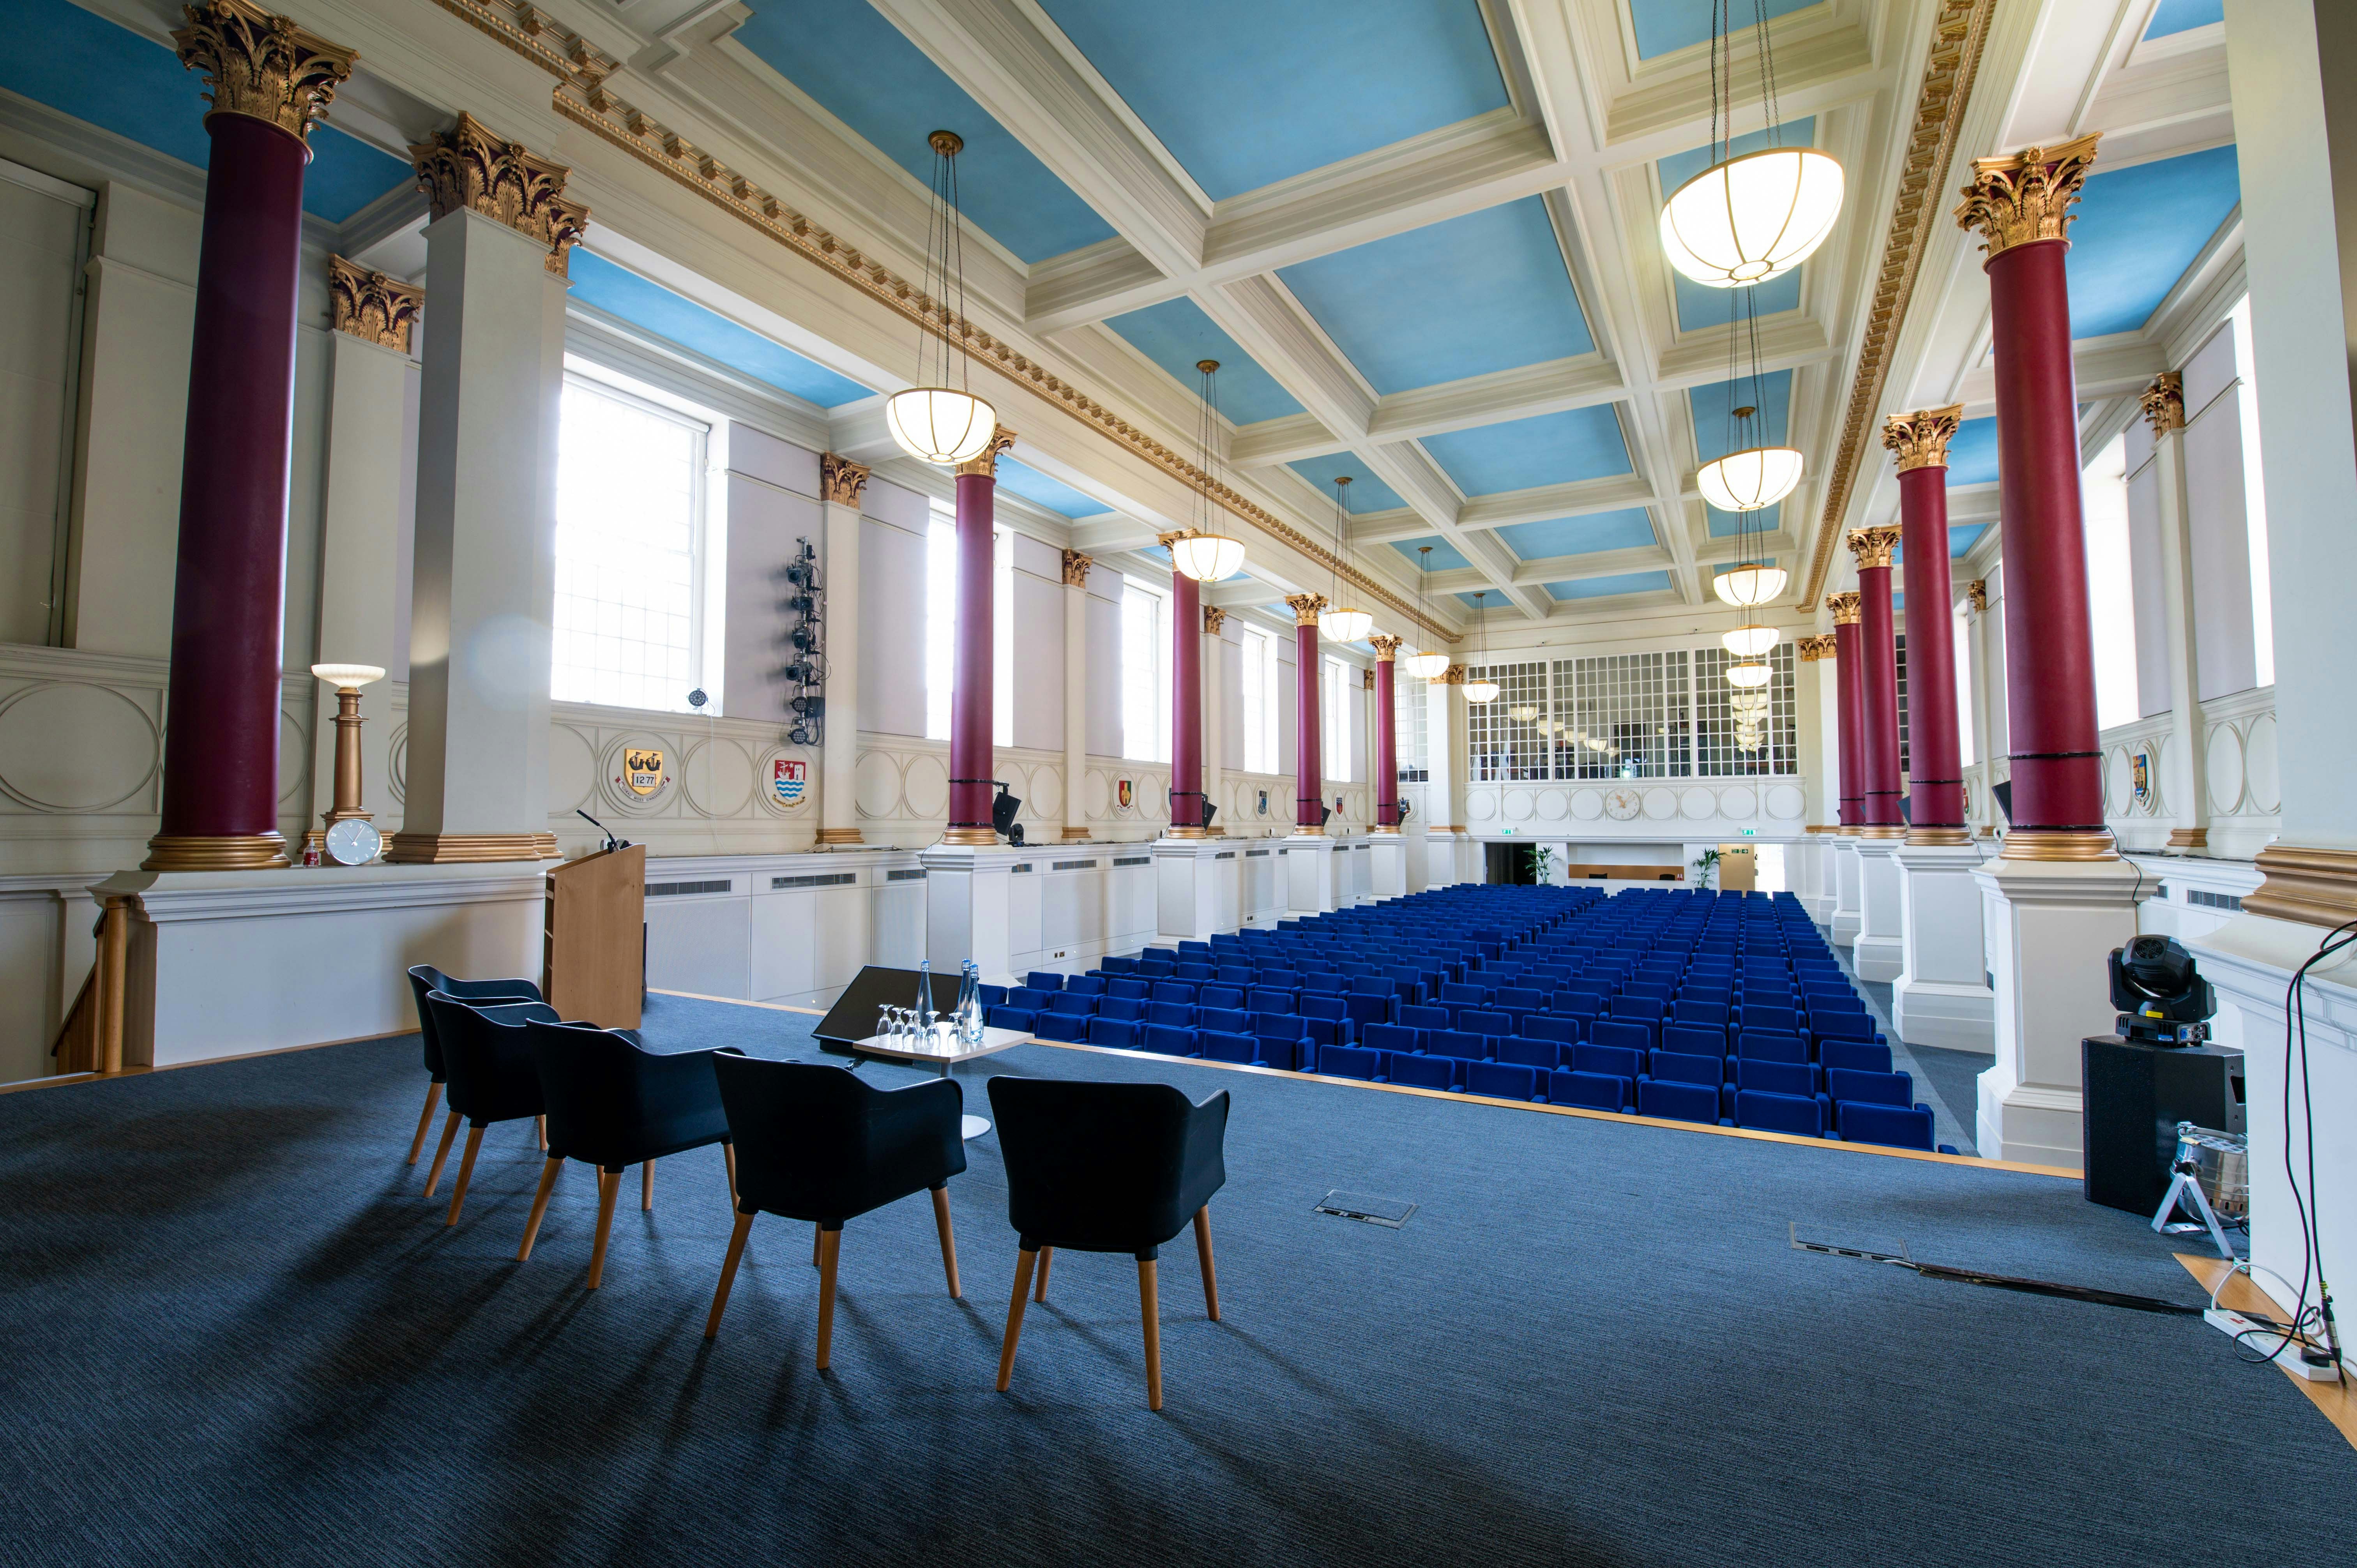 BMA House - Great Hall image 3